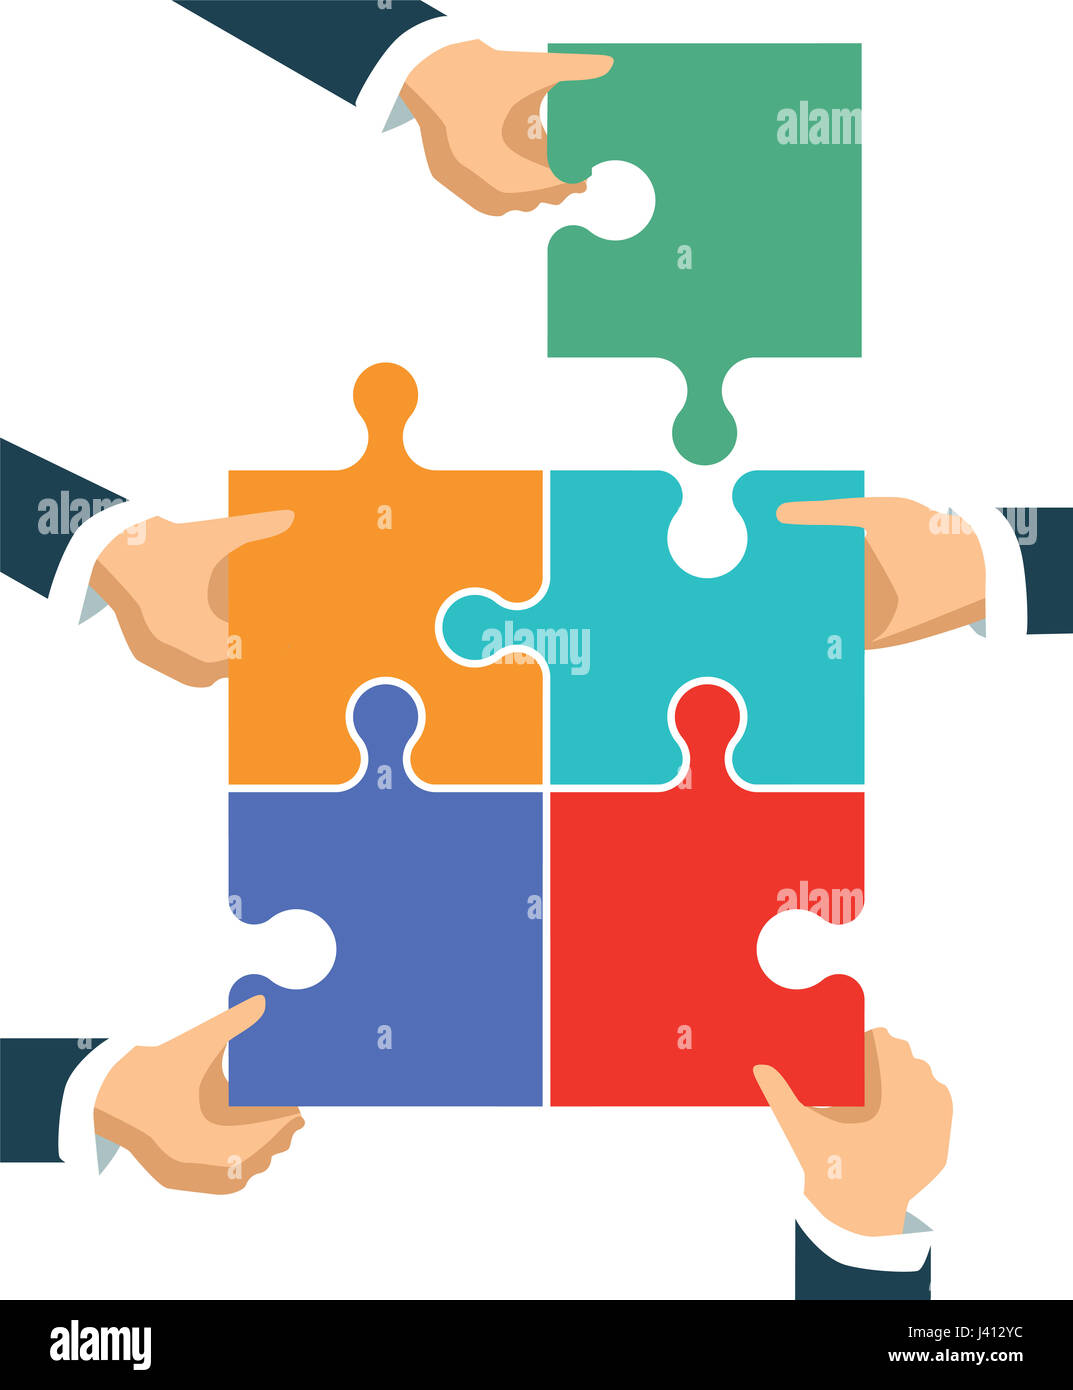 Connections and collaboration in group, illustration Stock Photo